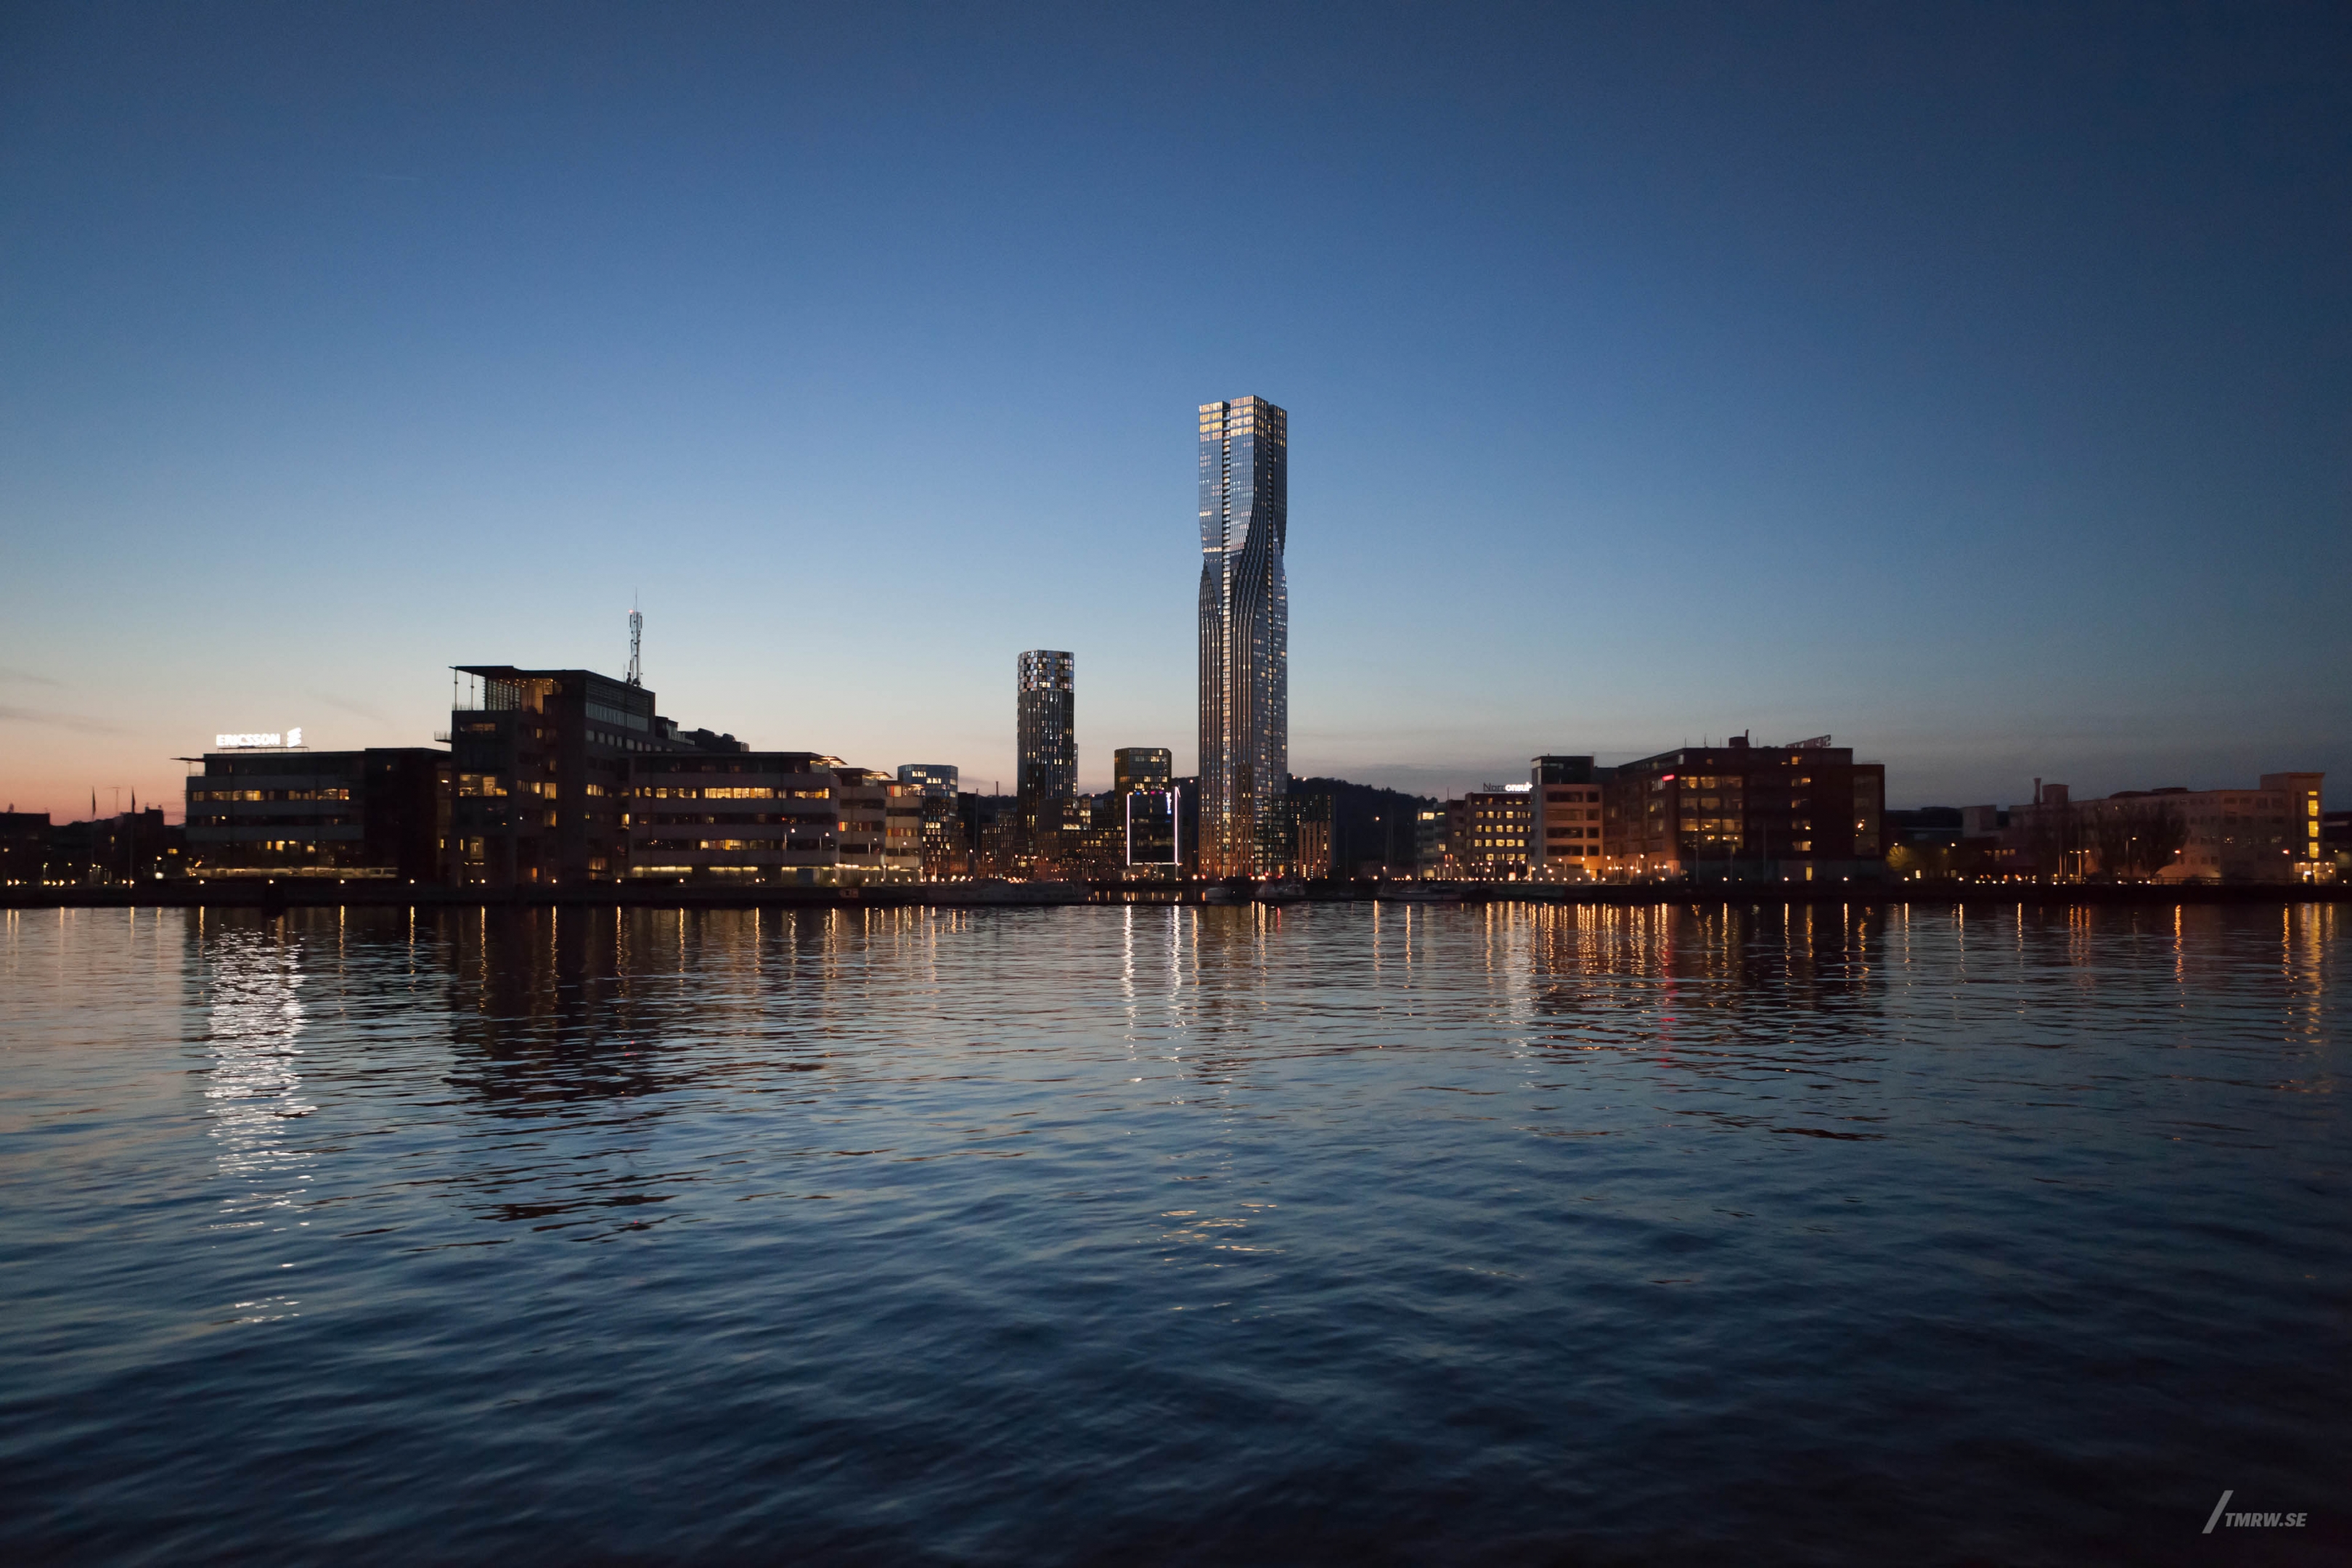 Architectural visualization of Karlatornet for Serneke a skyscraper in evening light from a sea view.